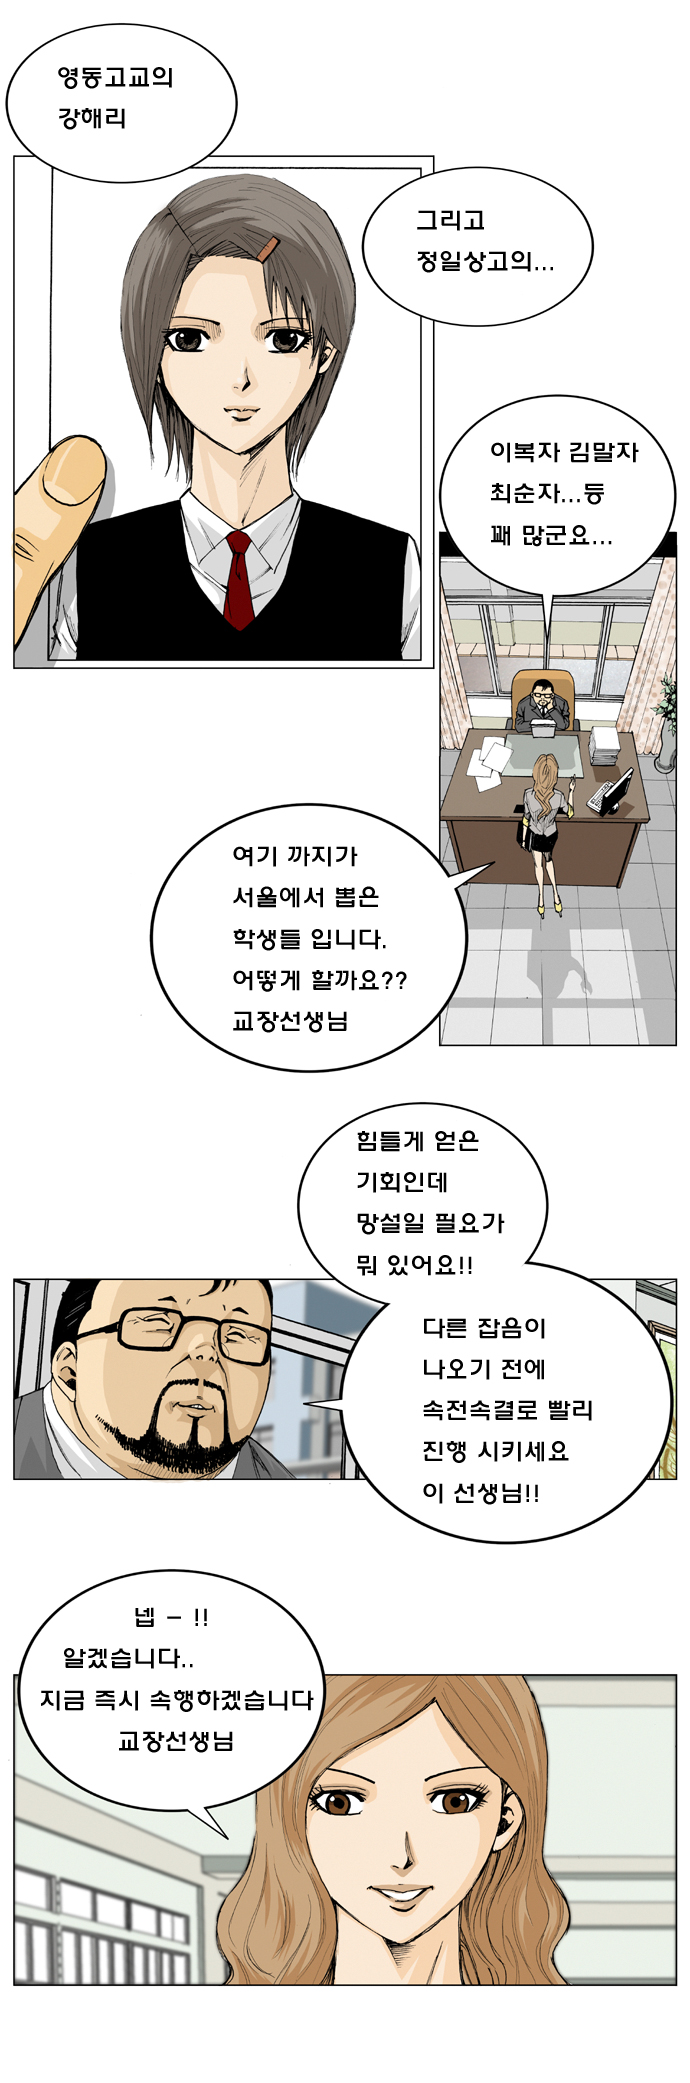 Ultimate Legend - Kang Hae Hyo - Chapter 1 - Page 3